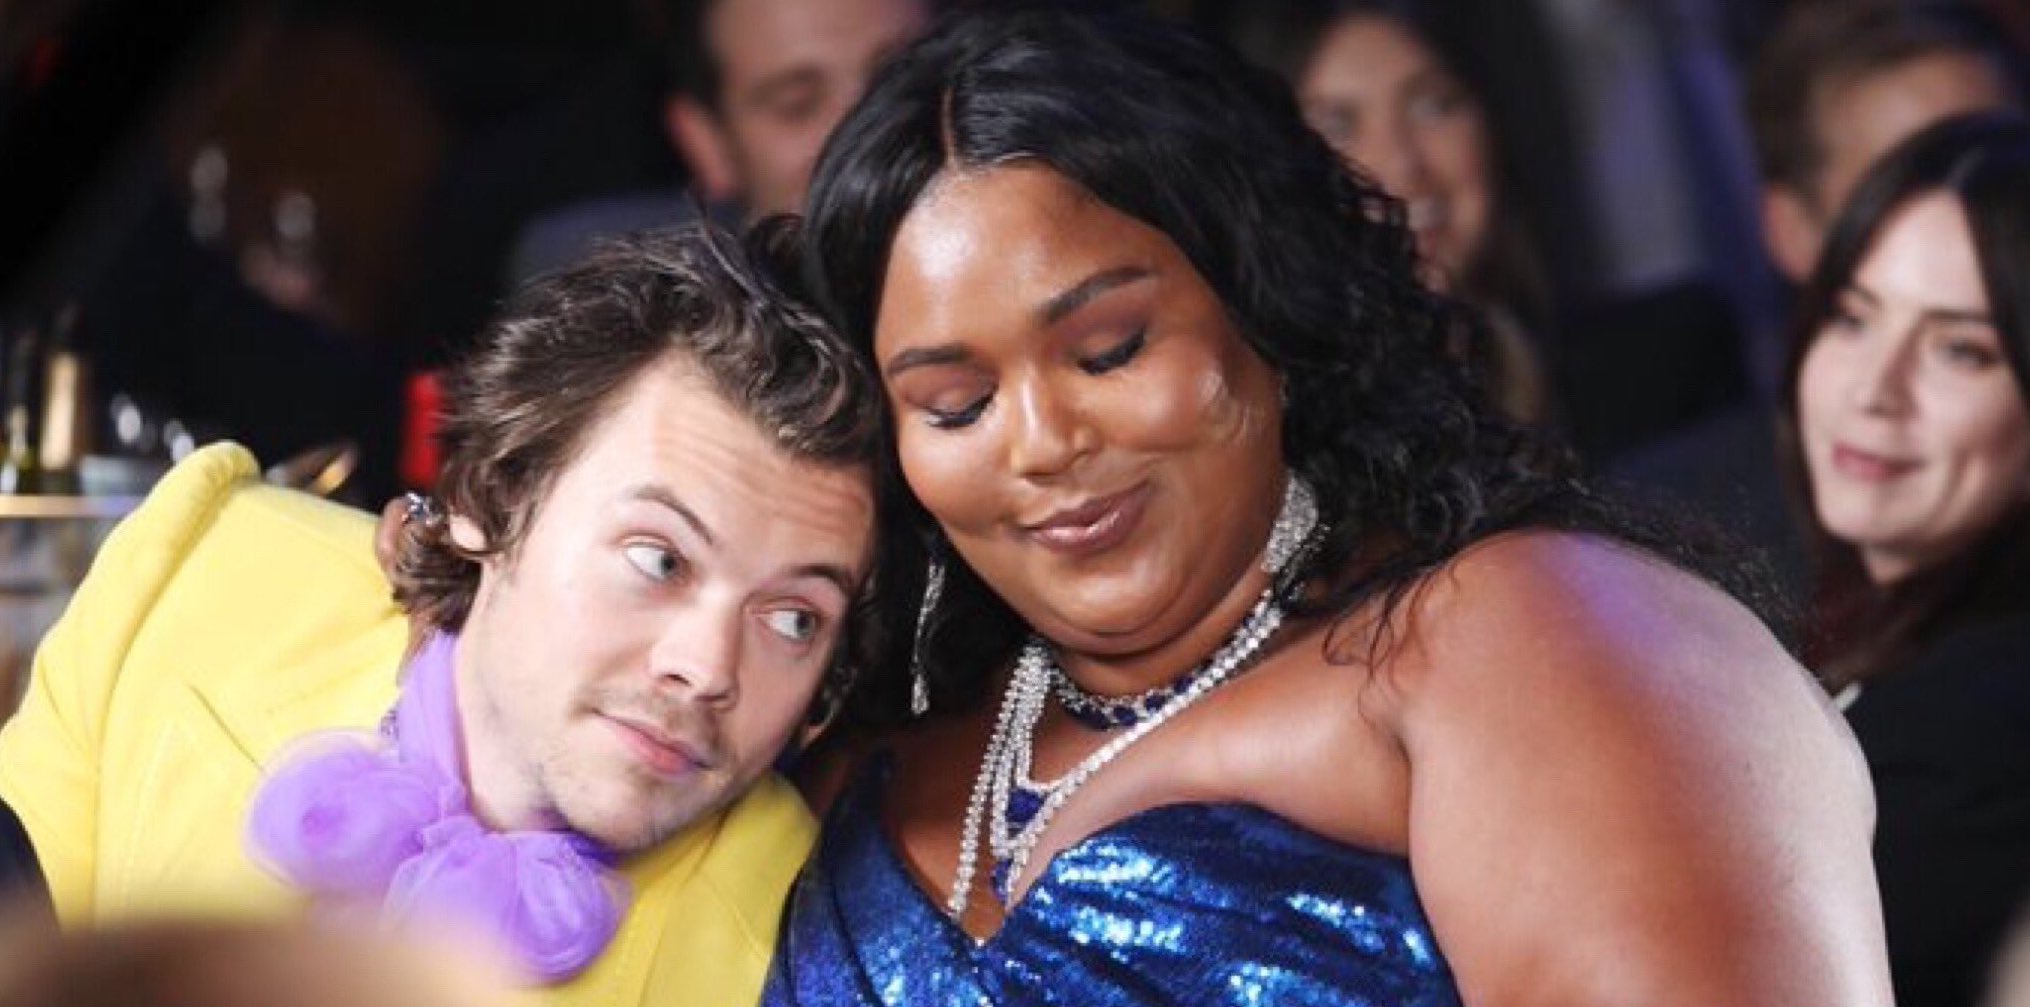 Lizzo and Harry Styles became the ultimate power couple at the Brits